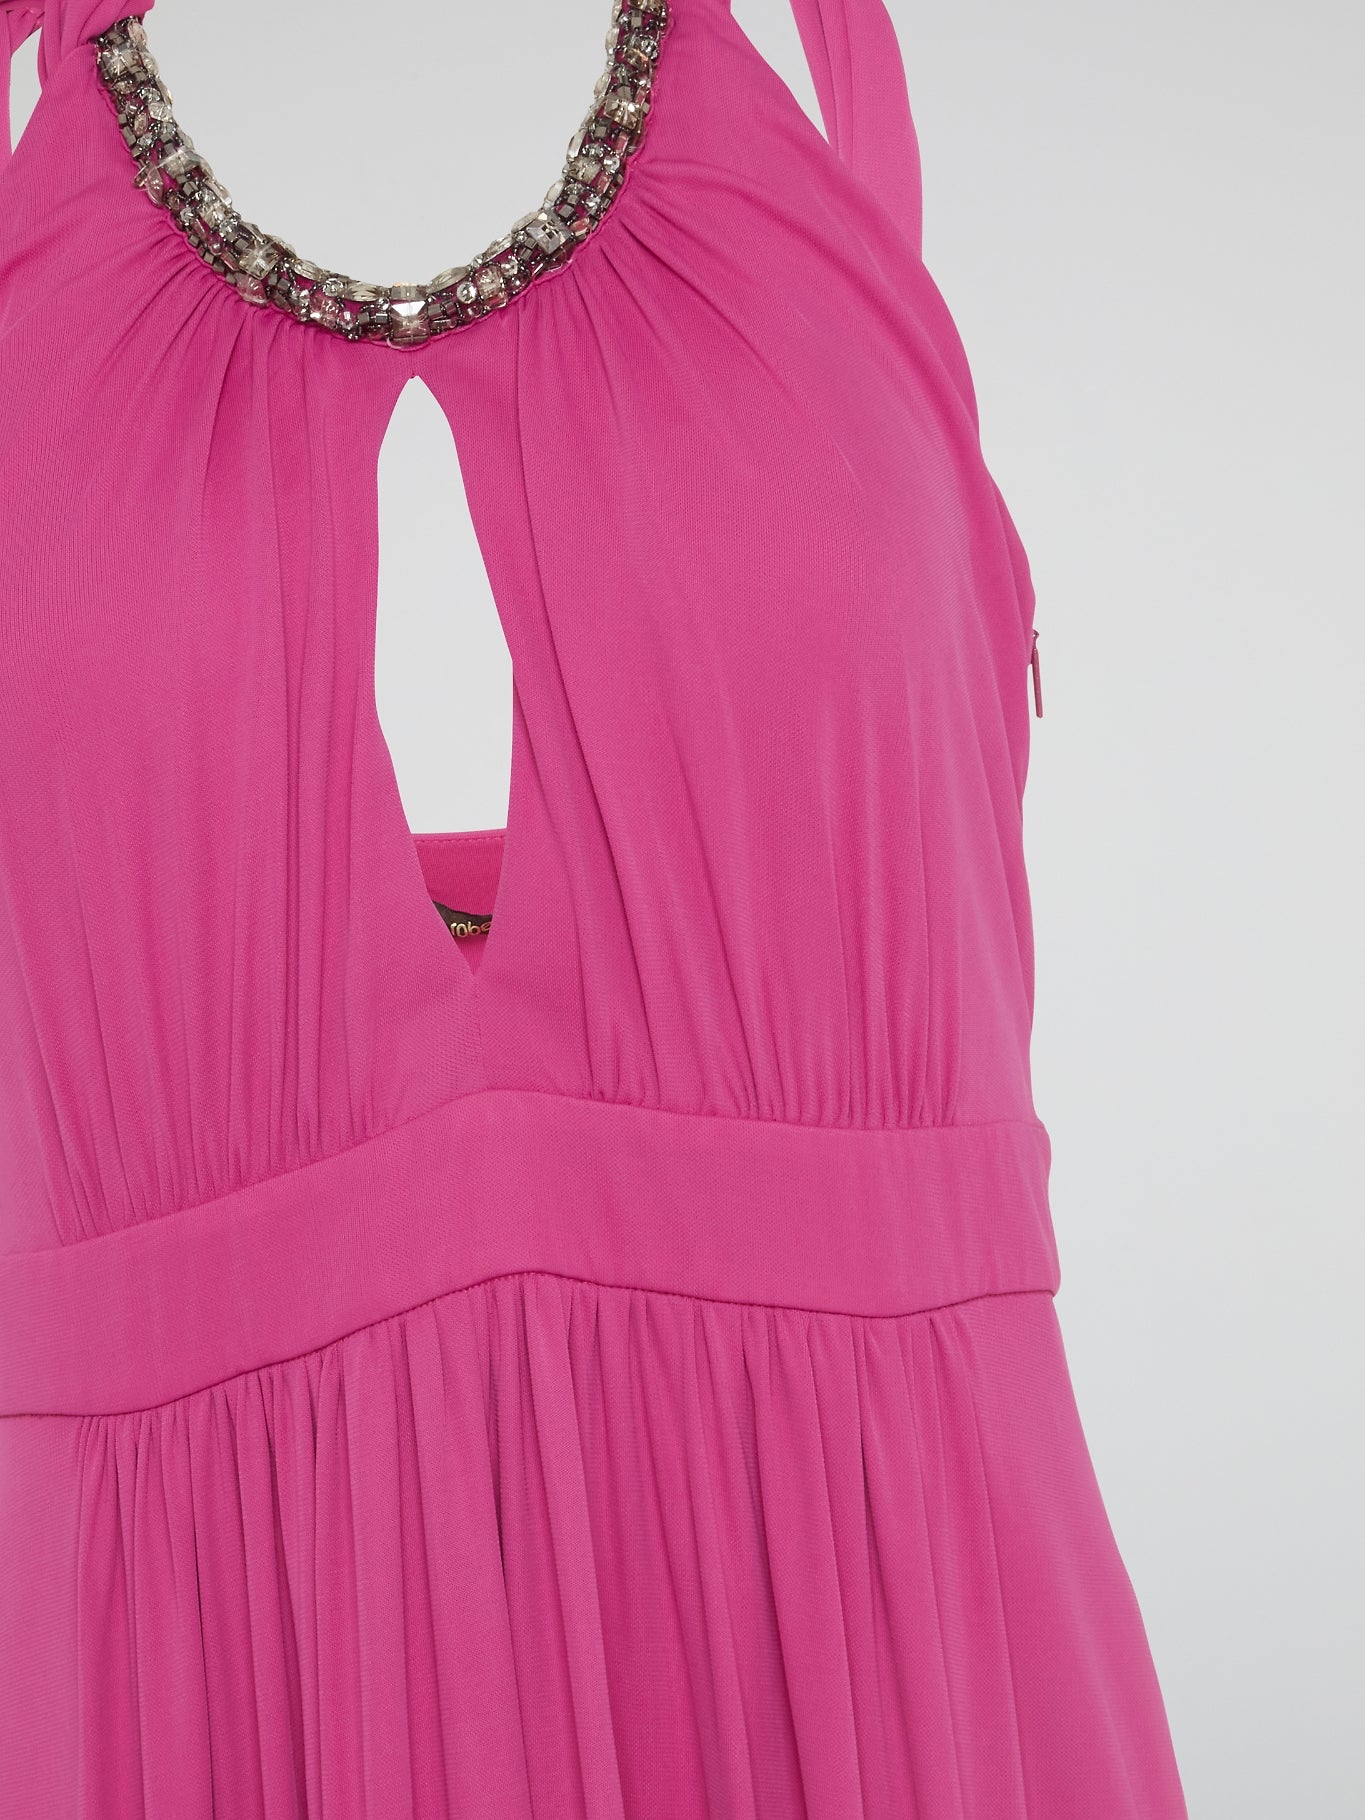 Channel your inner goddess in this stunning Pink Crystal Embellished Halter Neck Maxi Dress by Roberto Cavalli. The luxurious crystals add a touch of glamour to the flowy silhouette, making it perfect for any special occasion. Stand out from the crowd and turn heads wherever you go in this show-stopping piece.